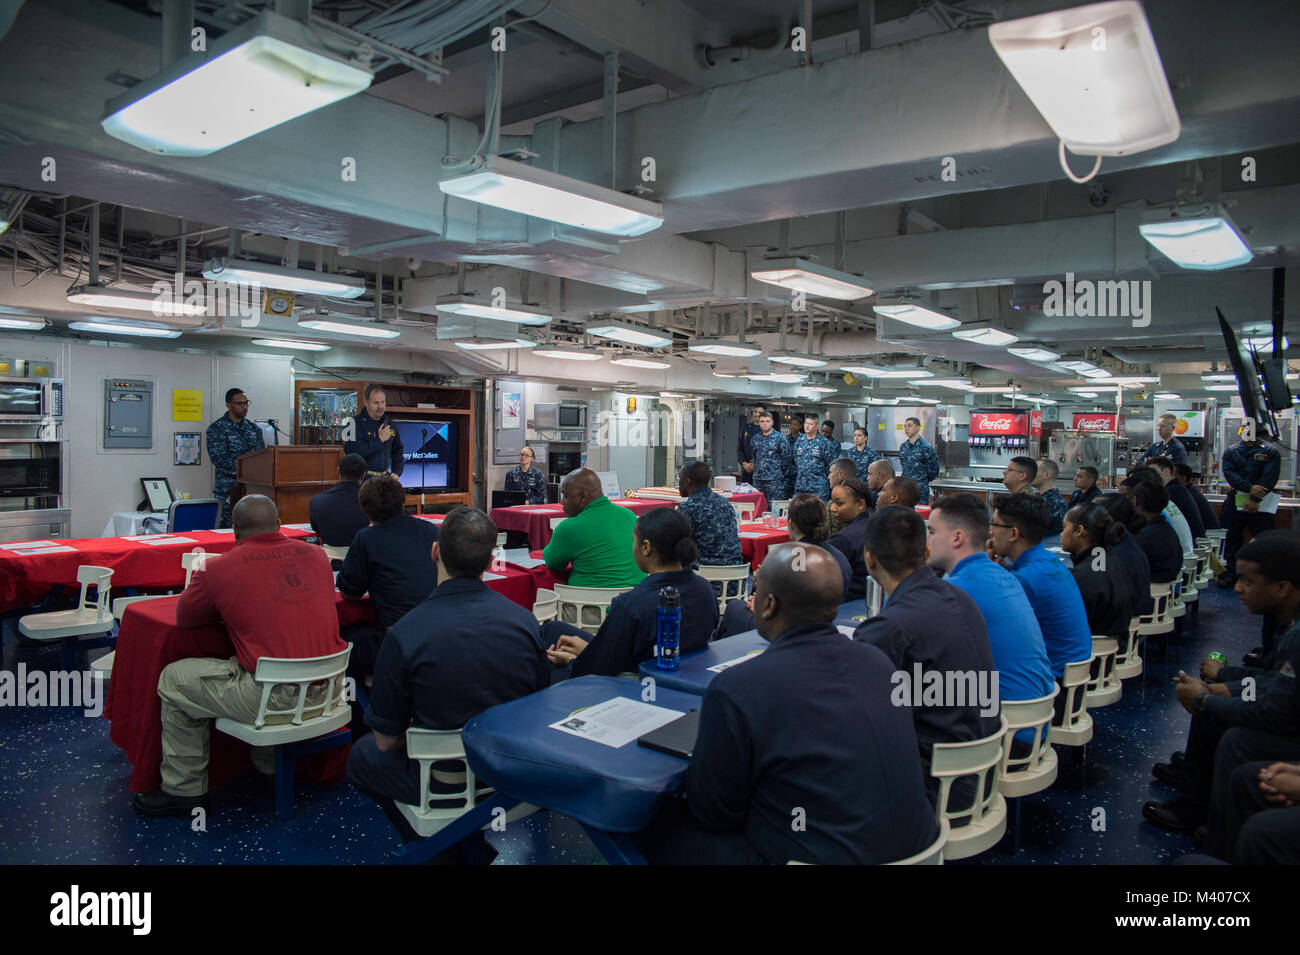 180207-N-NB544-056  SOUTH CHINA SEA  (Feb. 7, 2018) Capt. Larry McCullen, commanding officer of the amphibious assault ship USS Bonhomme Richard (LHD 6), delivers closing remarks during an African American/Black History Month celebration on the ship’s mess decks. Bonhomme Richard is operating in the Indo-Asia-Pacific region as part of a regularly scheduled patrol and provides a rapid-response capability in the event of a regional contingency or natural disaster. (U.S. Navy photo by Mass Communication Specialist 2nd Class Kyle Carlstrom/Released) Stock Photo